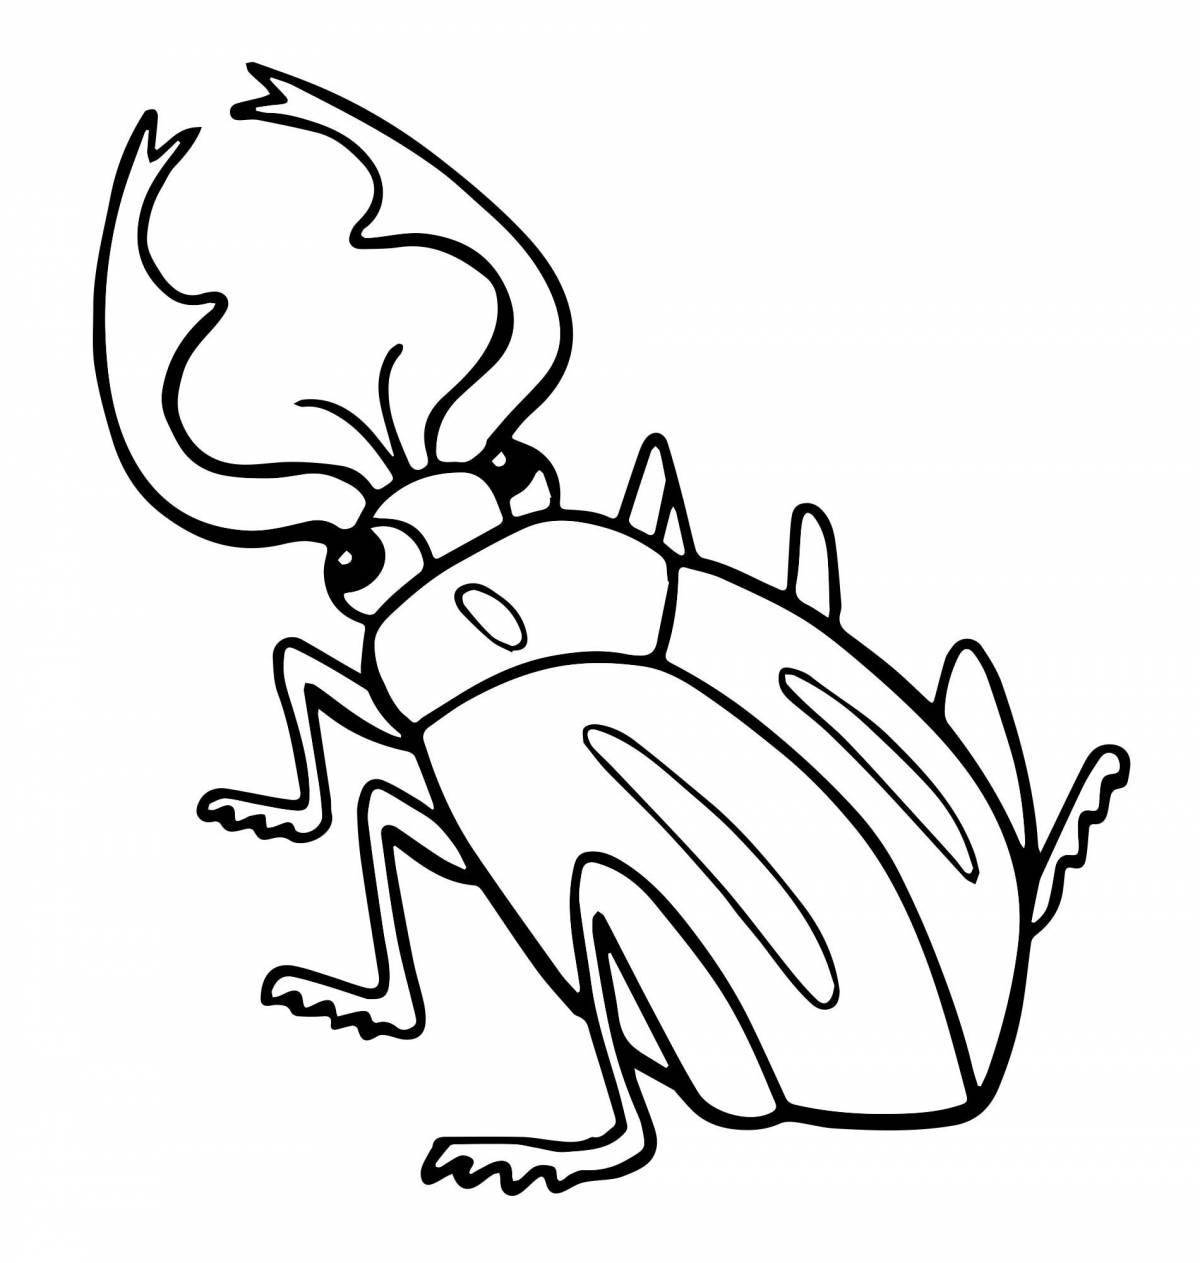 Amazing beetle coloring book for kids